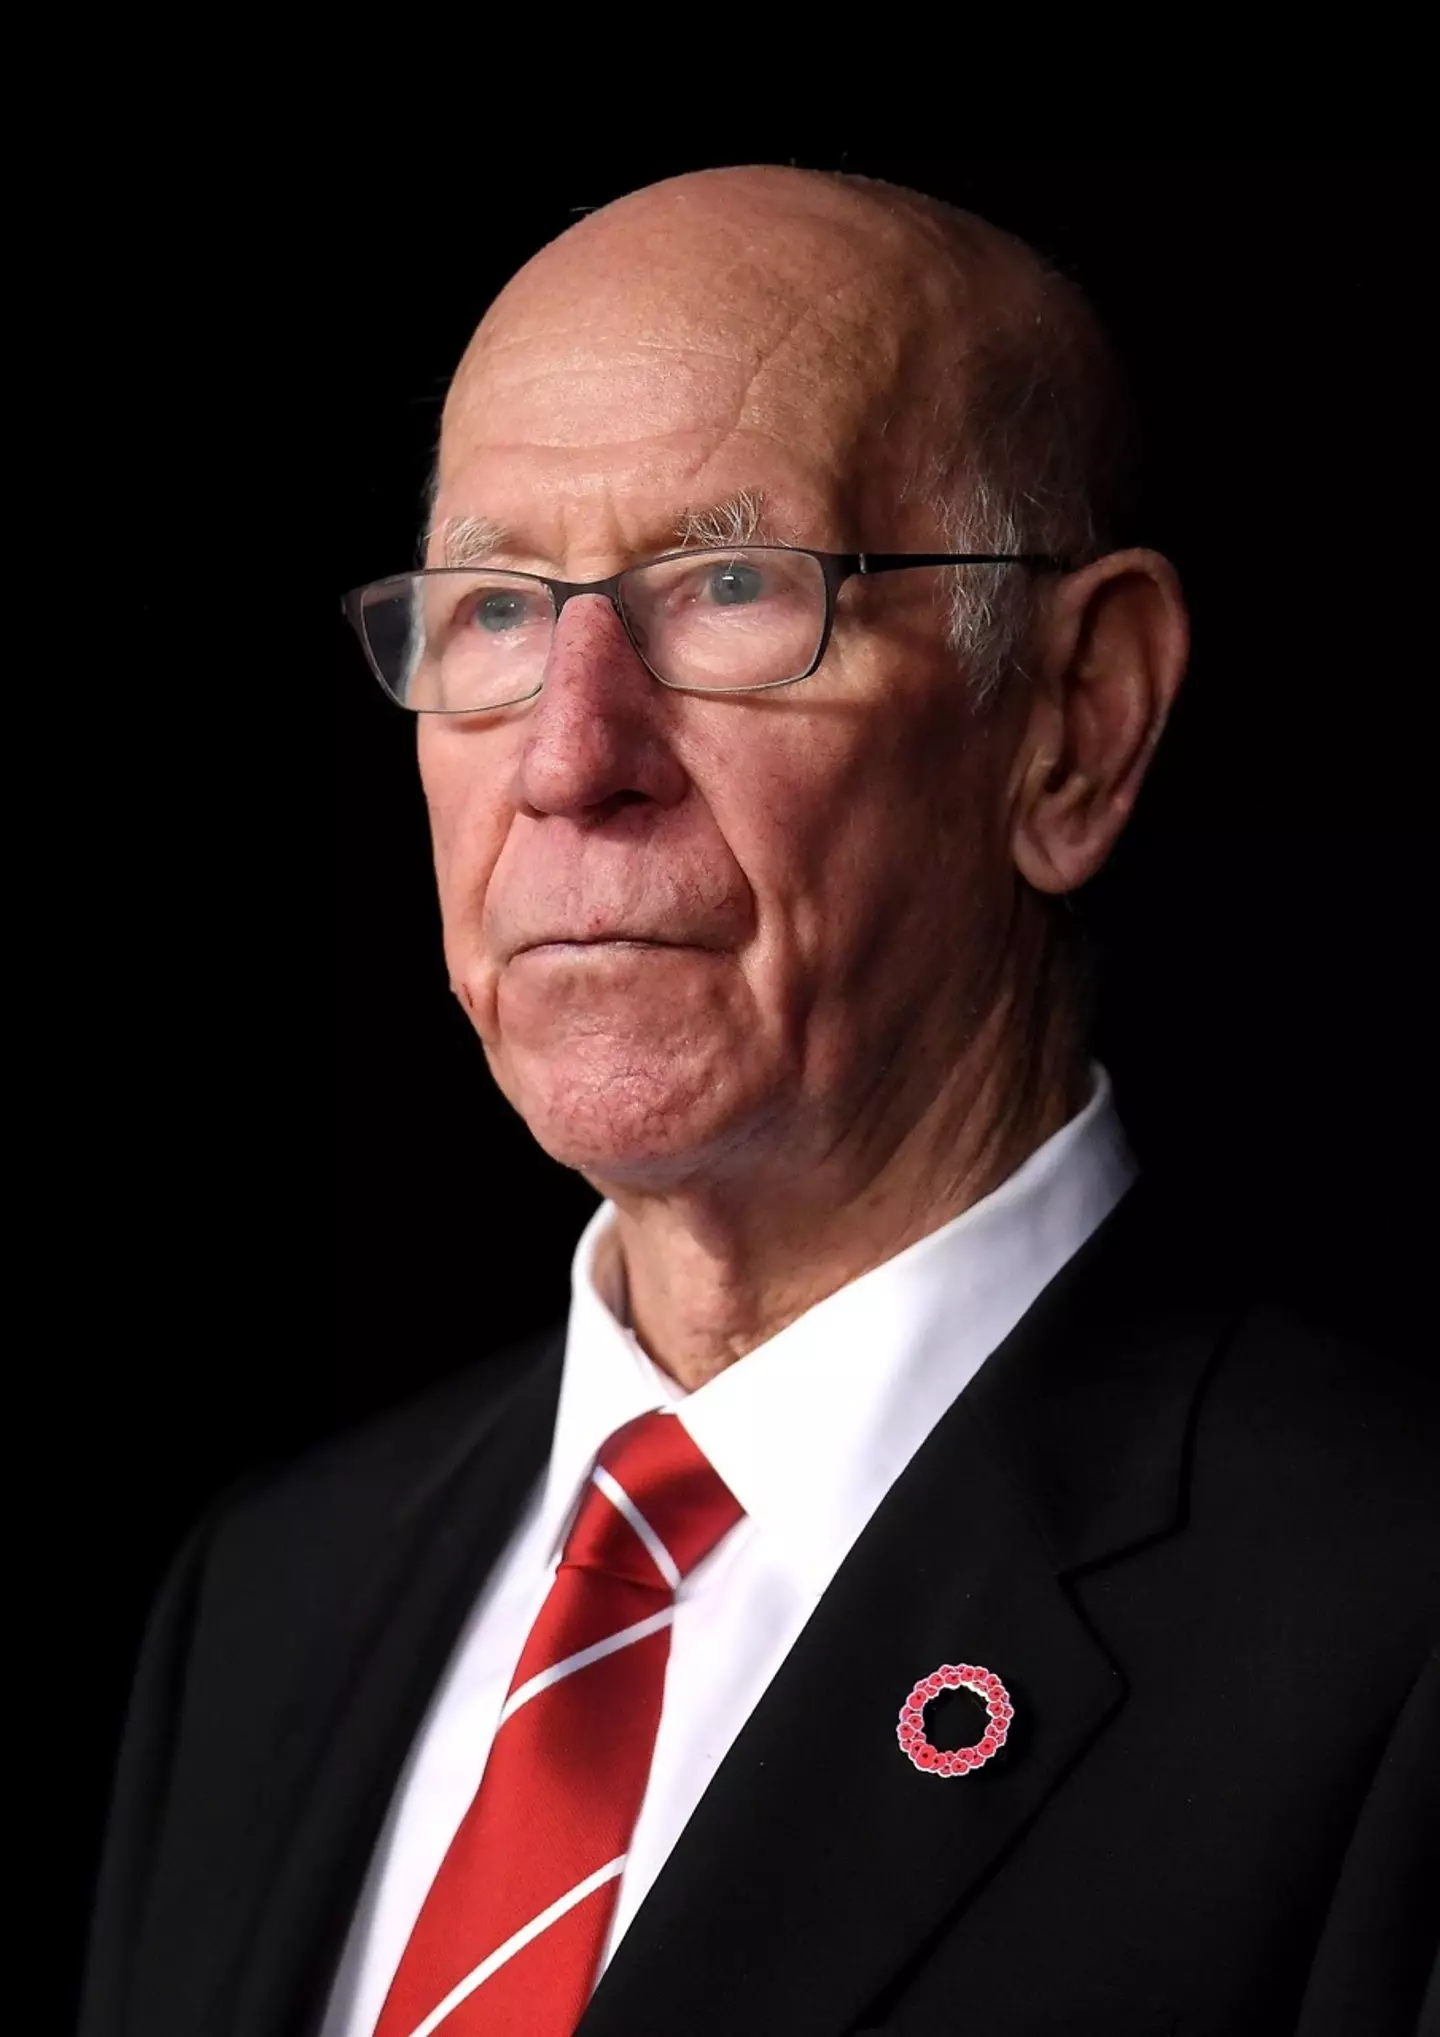 Manchester United and England great Sir Bobby Charlton has died at the age of 86.